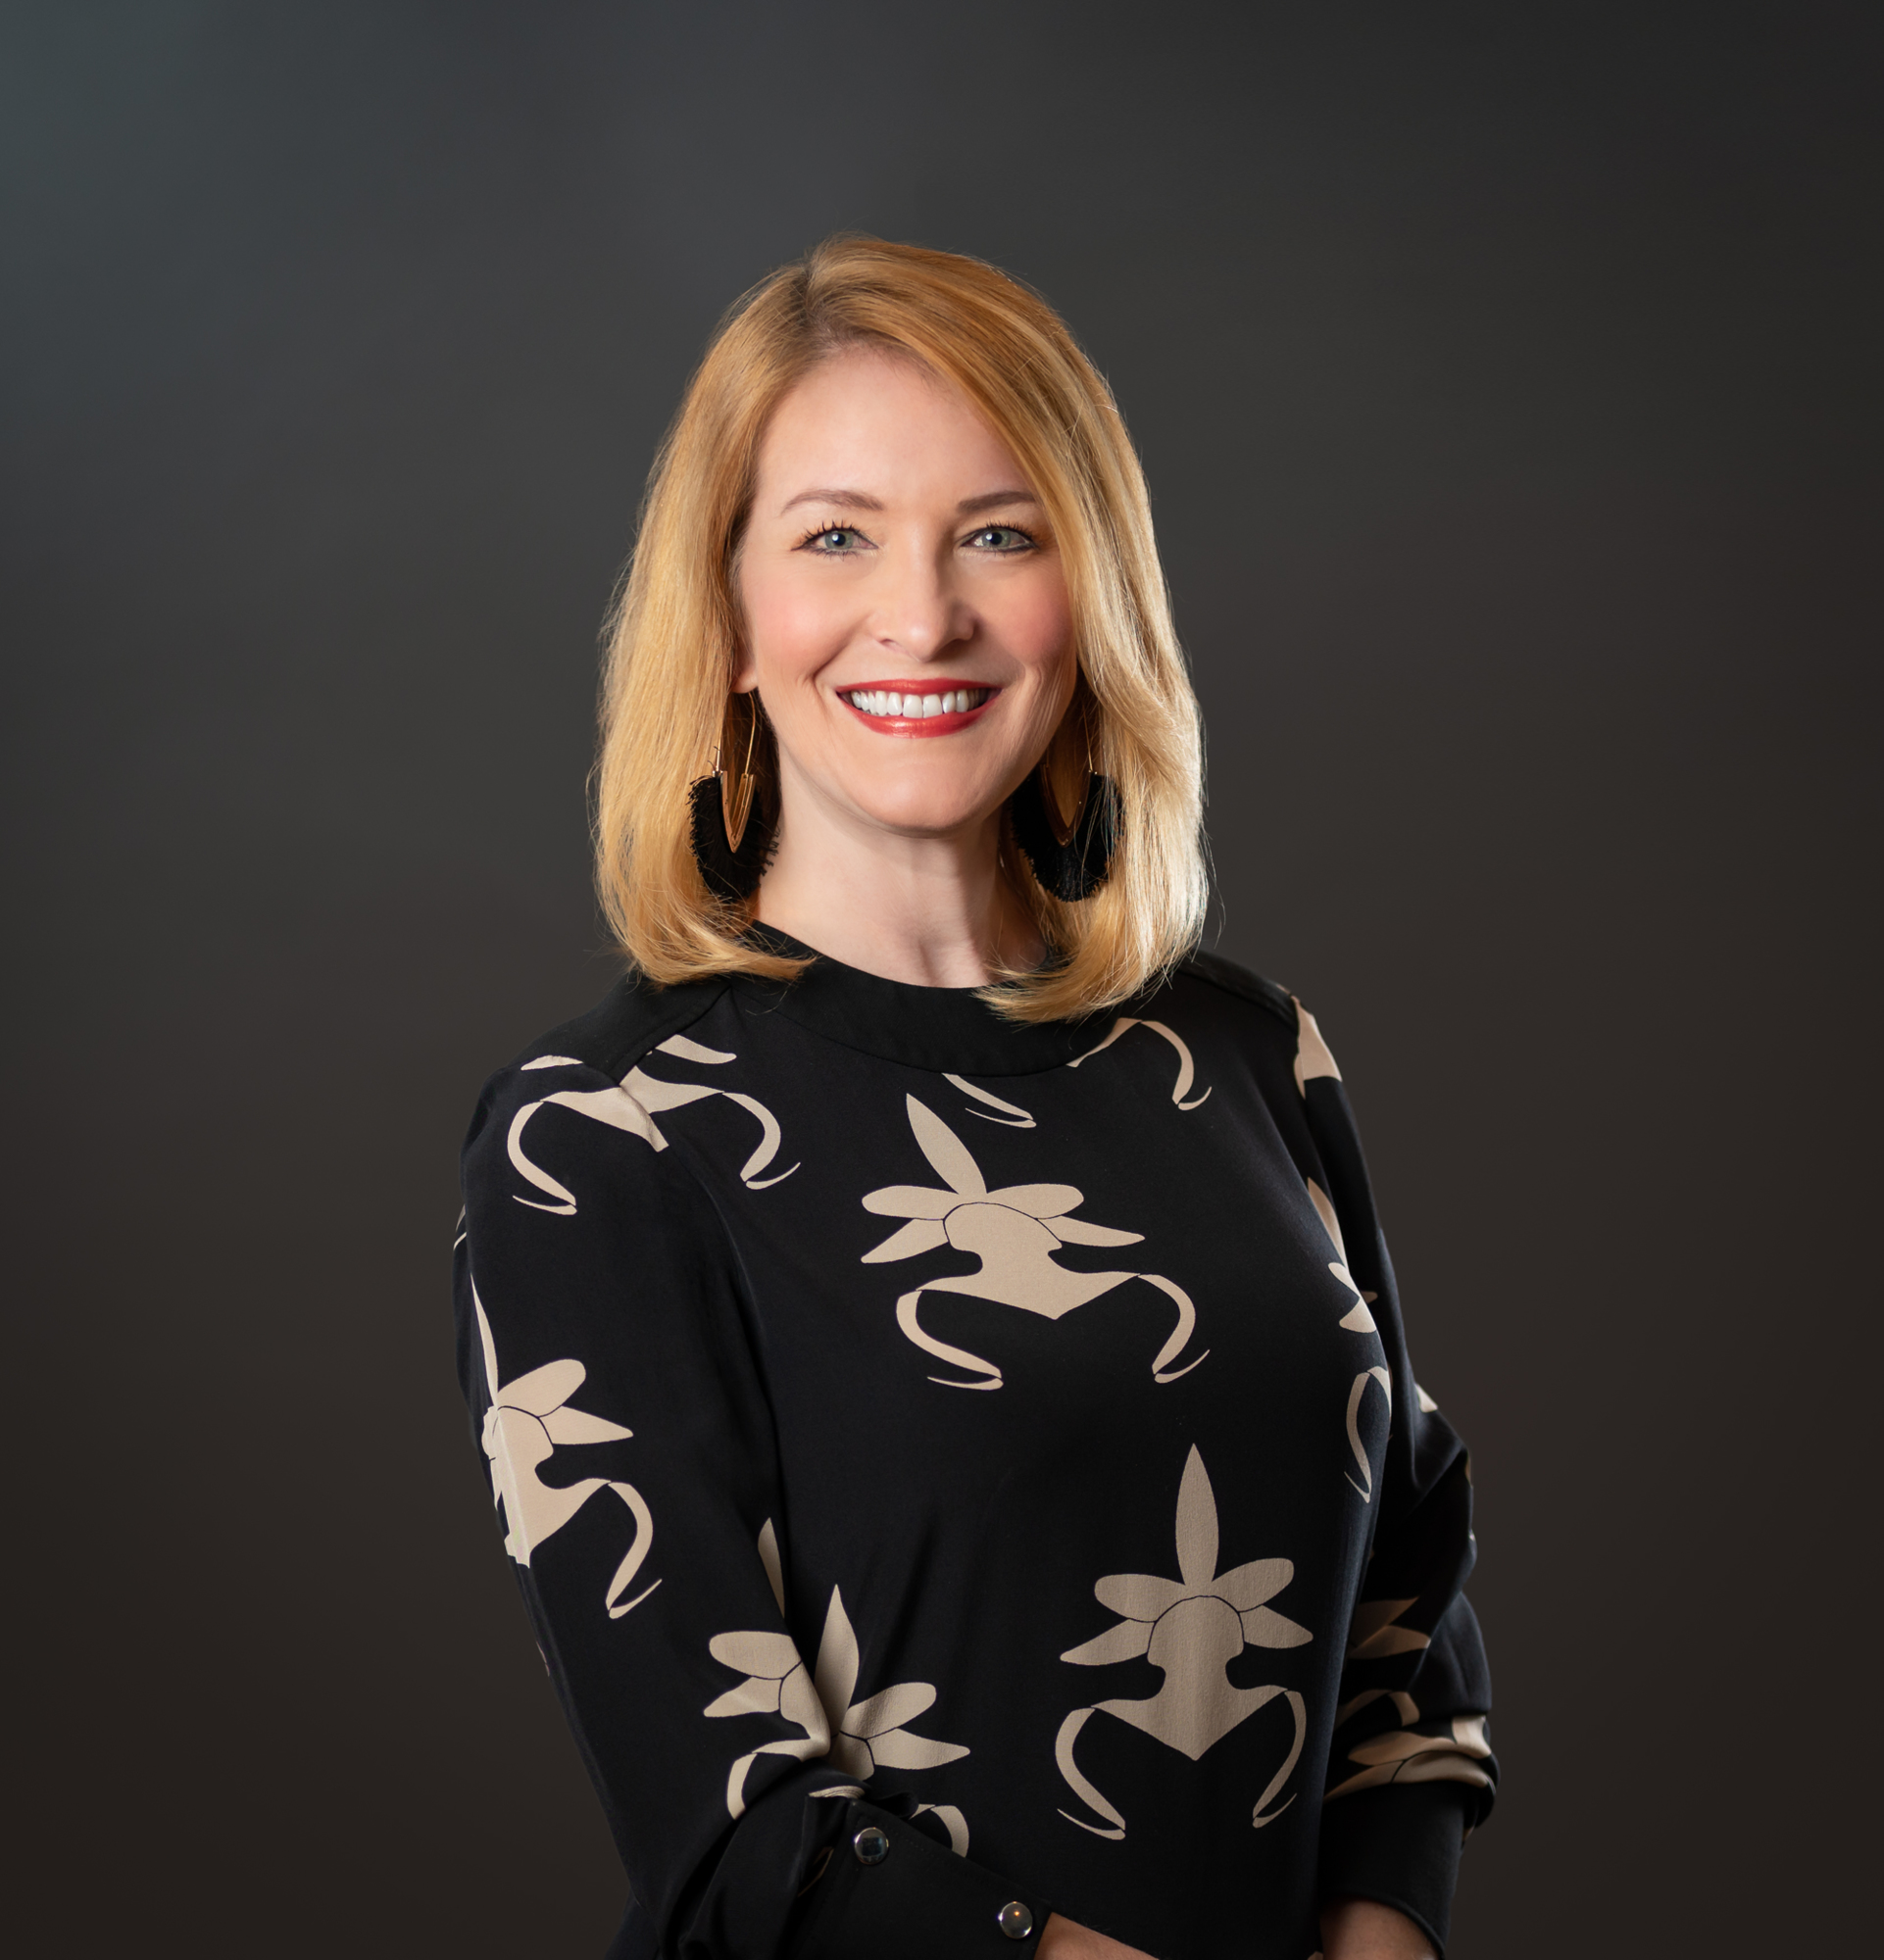 Observer Media Group President Emily Walsh has spent nearly two decades with the company, working in roles including publisher, chief digital officer, editor and advertising sales executive. File photo